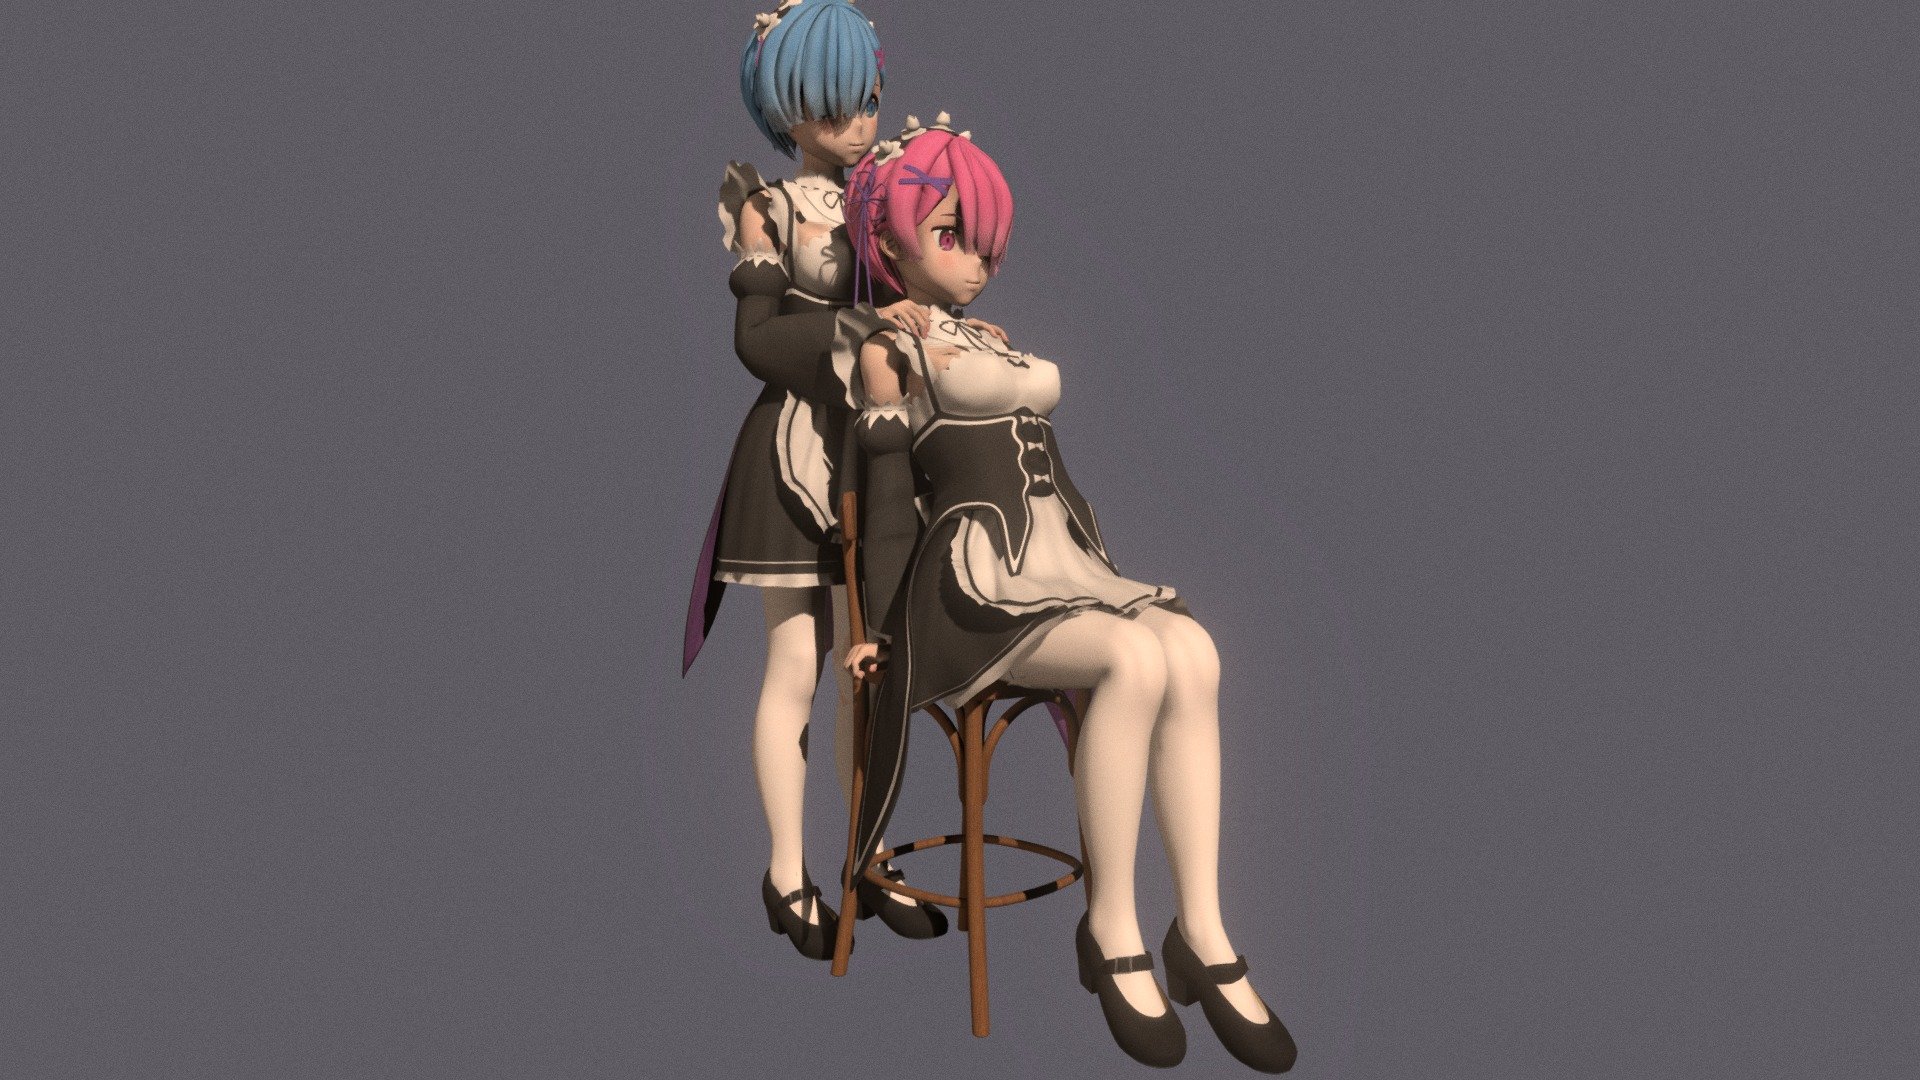 Posed model of anime girl Rem &amp; Ram (Re:Zero − Starting Life in Another World).

This product include .FBX (ver. 7200) and .MAX (ver. 2010) files.

Rigged version: https://sketchfab.com/3d-models/t-pose-rigged-model-of-rem-ram-60eddabea1d24e978104798dc32ce0fc

I support convert this 3D model to various file formats: 3DS; AI; ASE; DAE; DWF; DWG; DXF; FLT; HTR; IGS; M3G; MQO; OBJ; SAT; STL; W3D; WRL; X.

You can buy all of my models in one pack to save cost: https://sketchfab.com/3d-models/all-of-my-anime-girls-c5a56156994e4193b9e8fa21a3b8360b

And I can make commission models.

If you have any questions, please leave a comment or contact me via my email 3d.eden.project@gmail.com 3d model